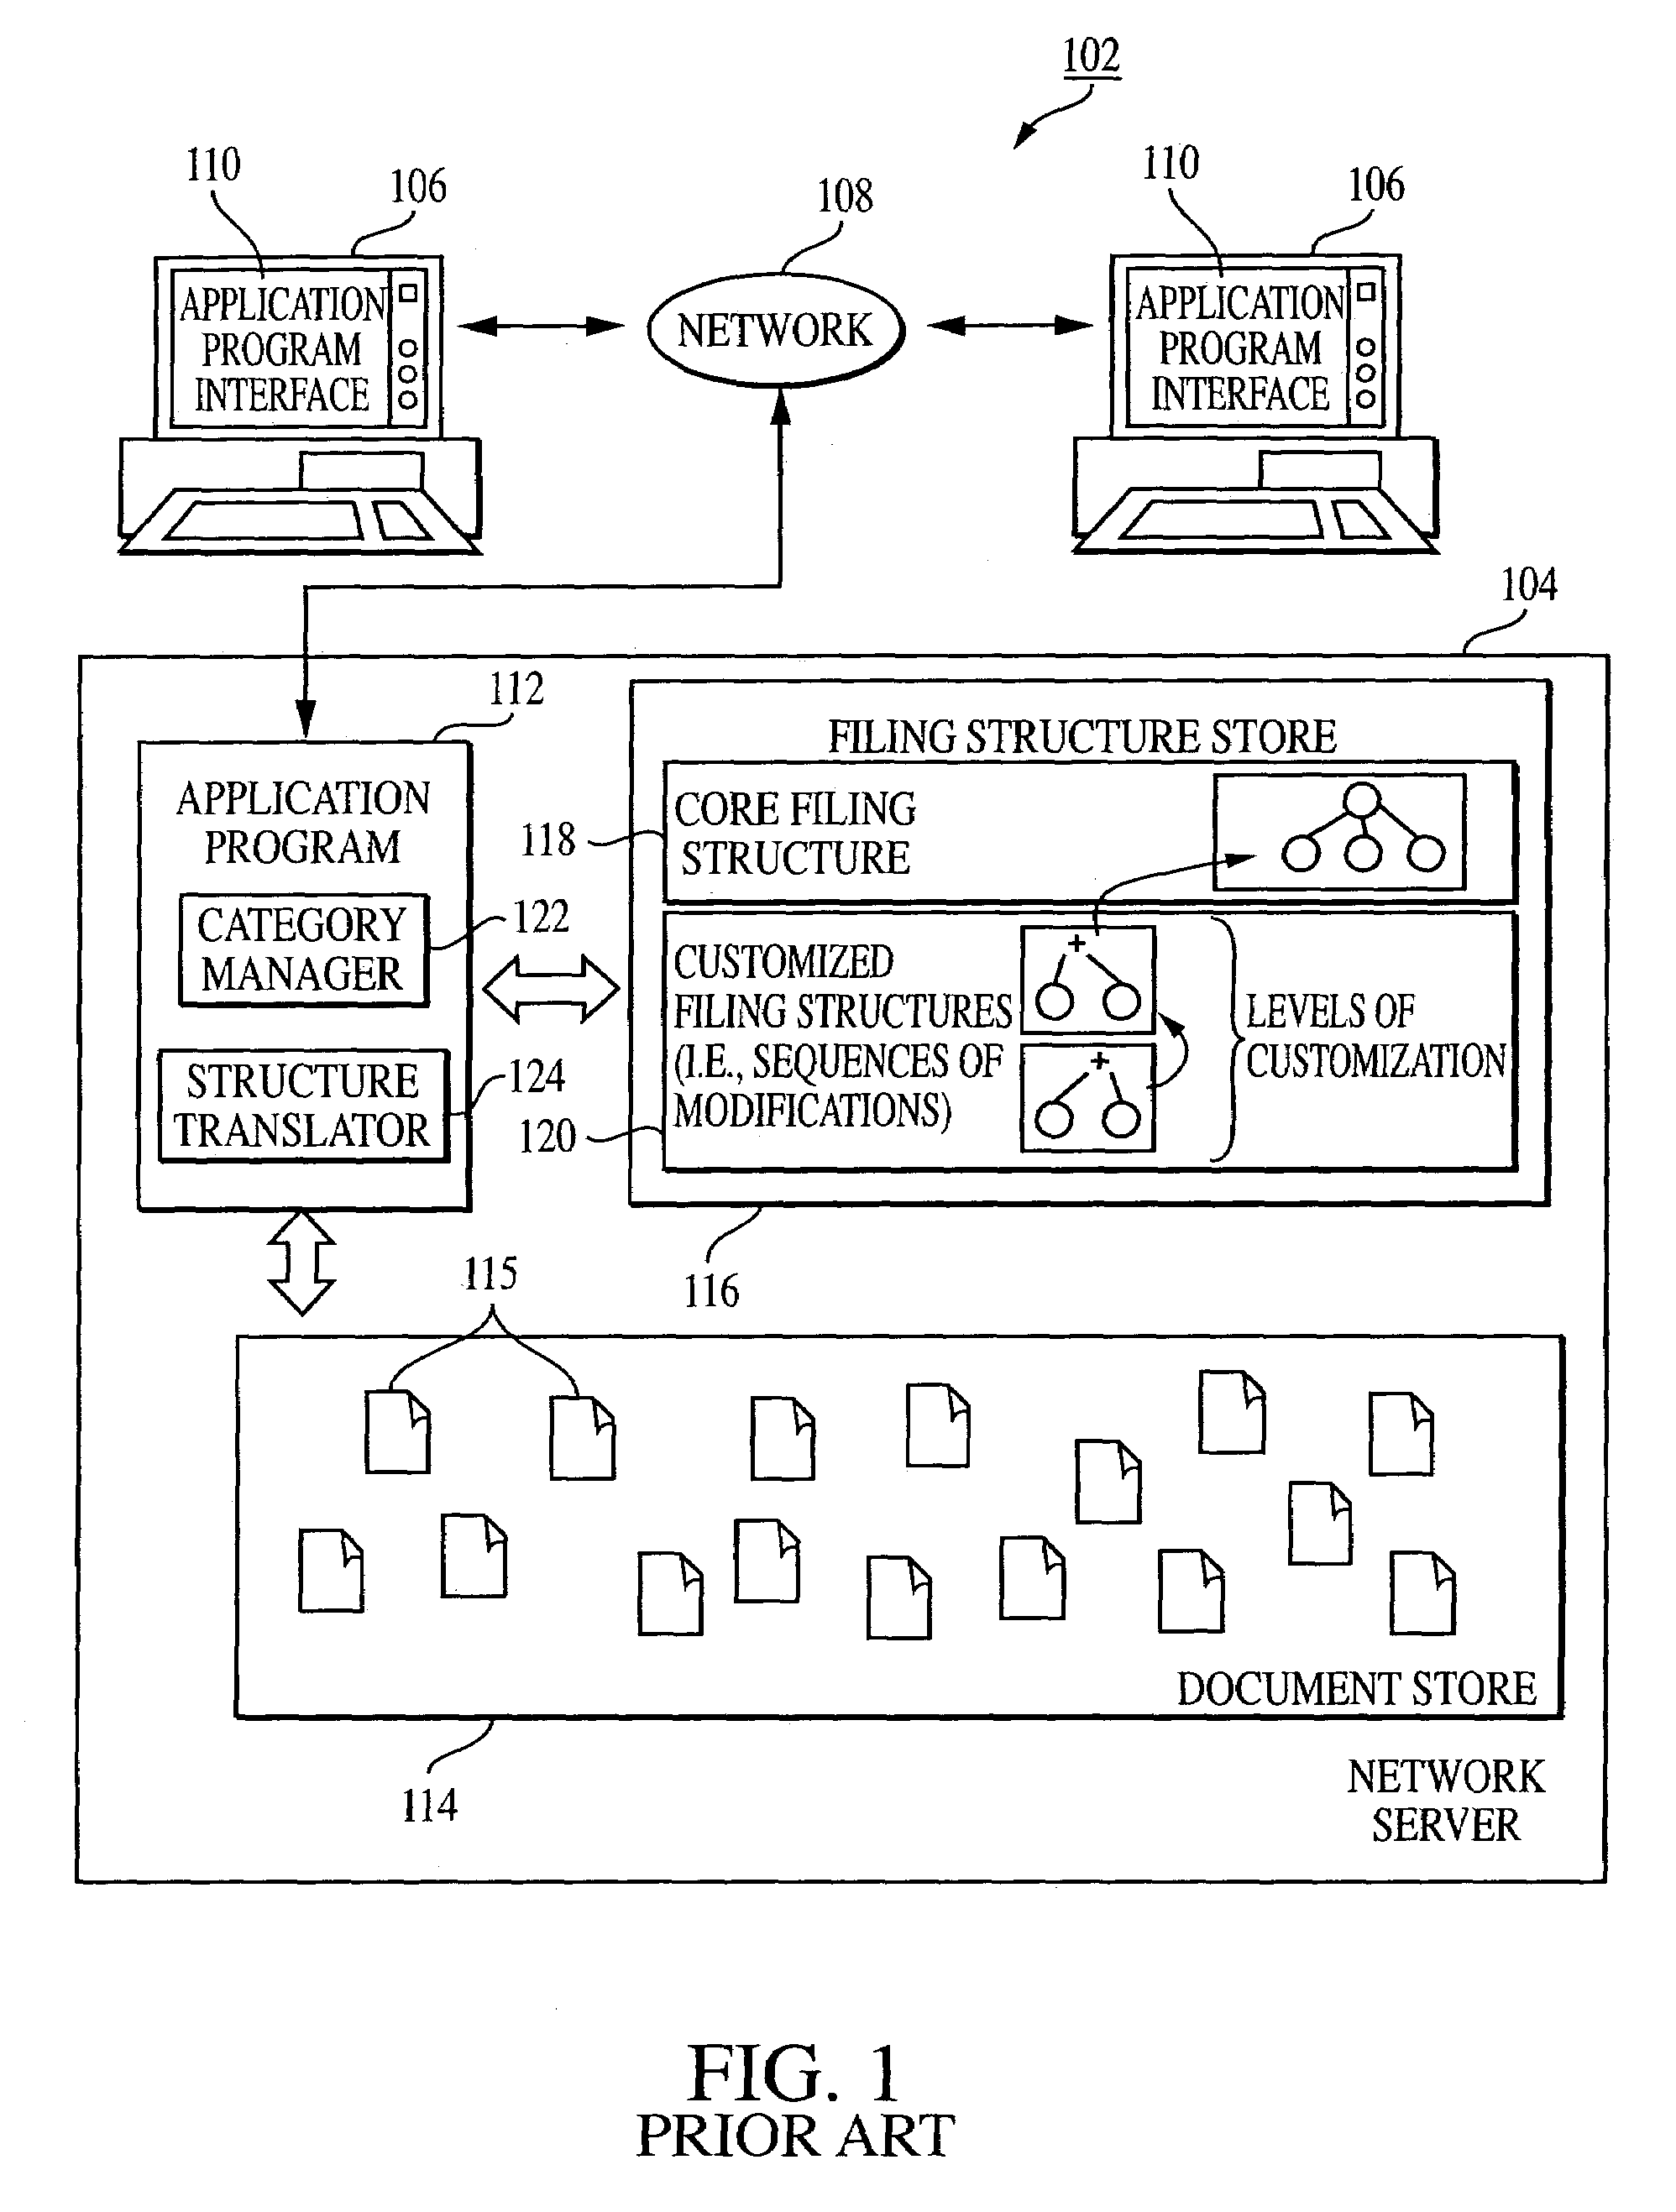 Computer assisted and/or implemented method for group collarboration on projects incorporating electronic information